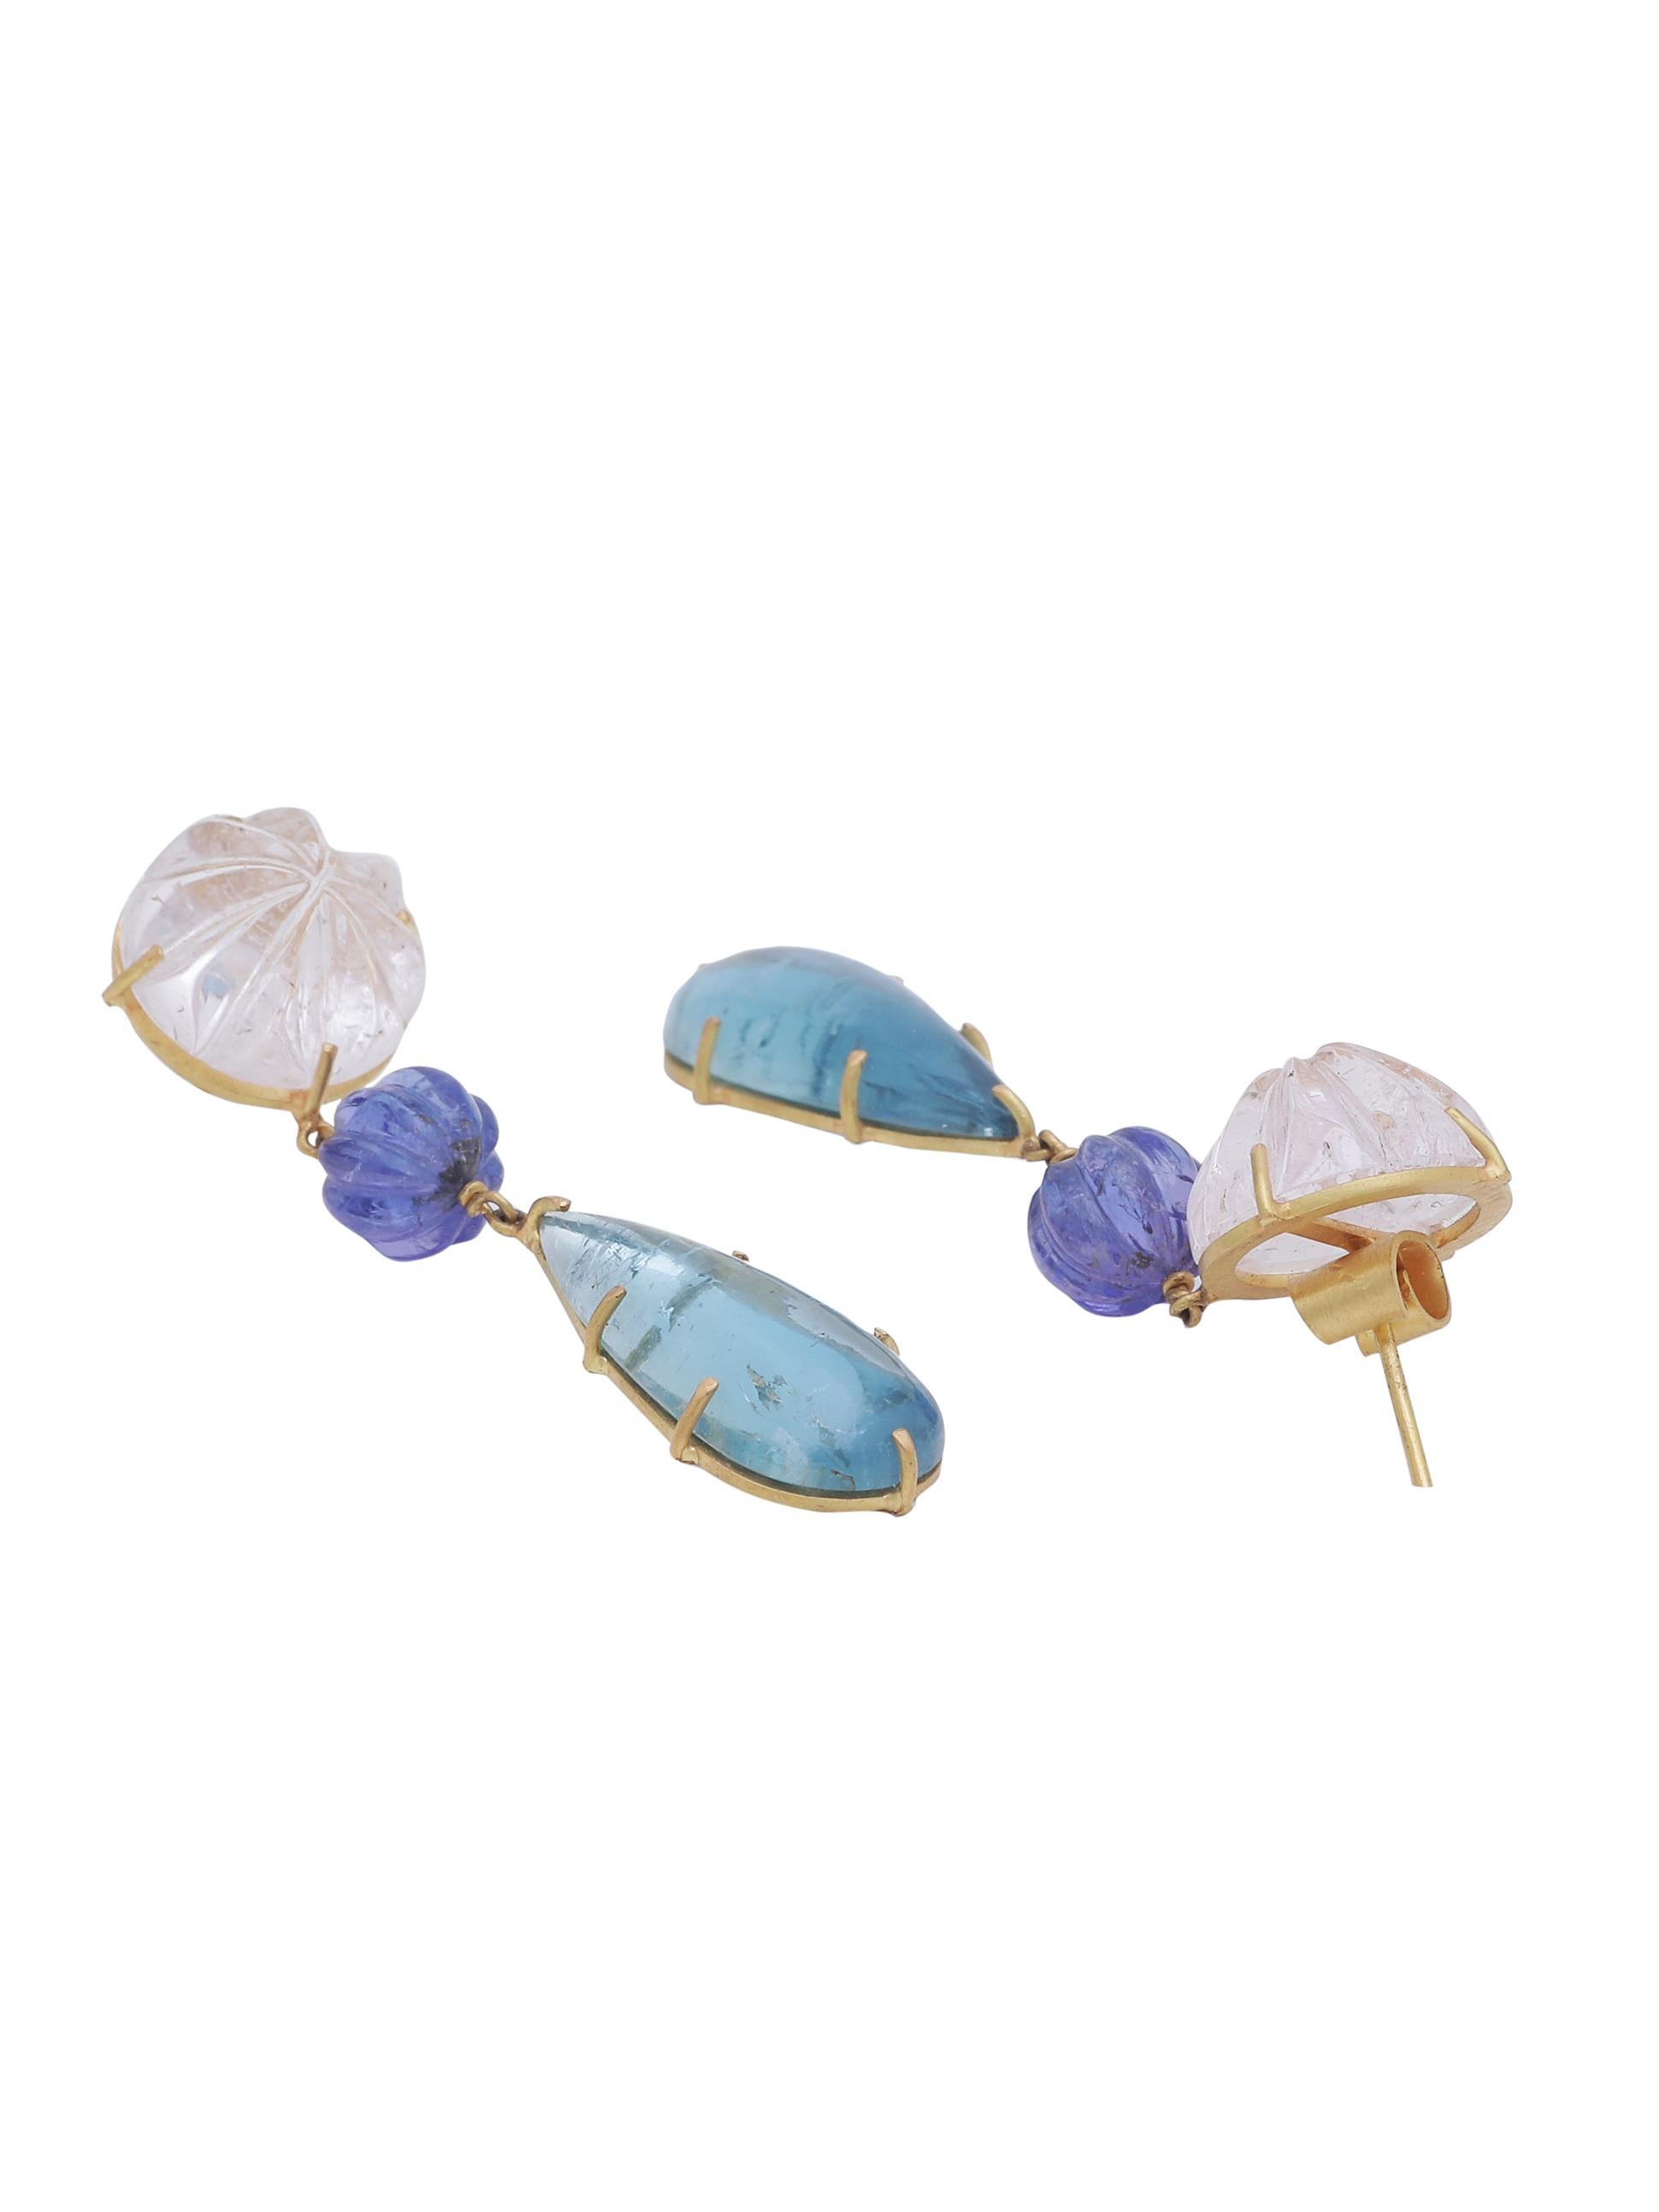 Modern Dangling Earring with Hand Carved Tanzanite Kunzite and Aquamarine in 22k Gold